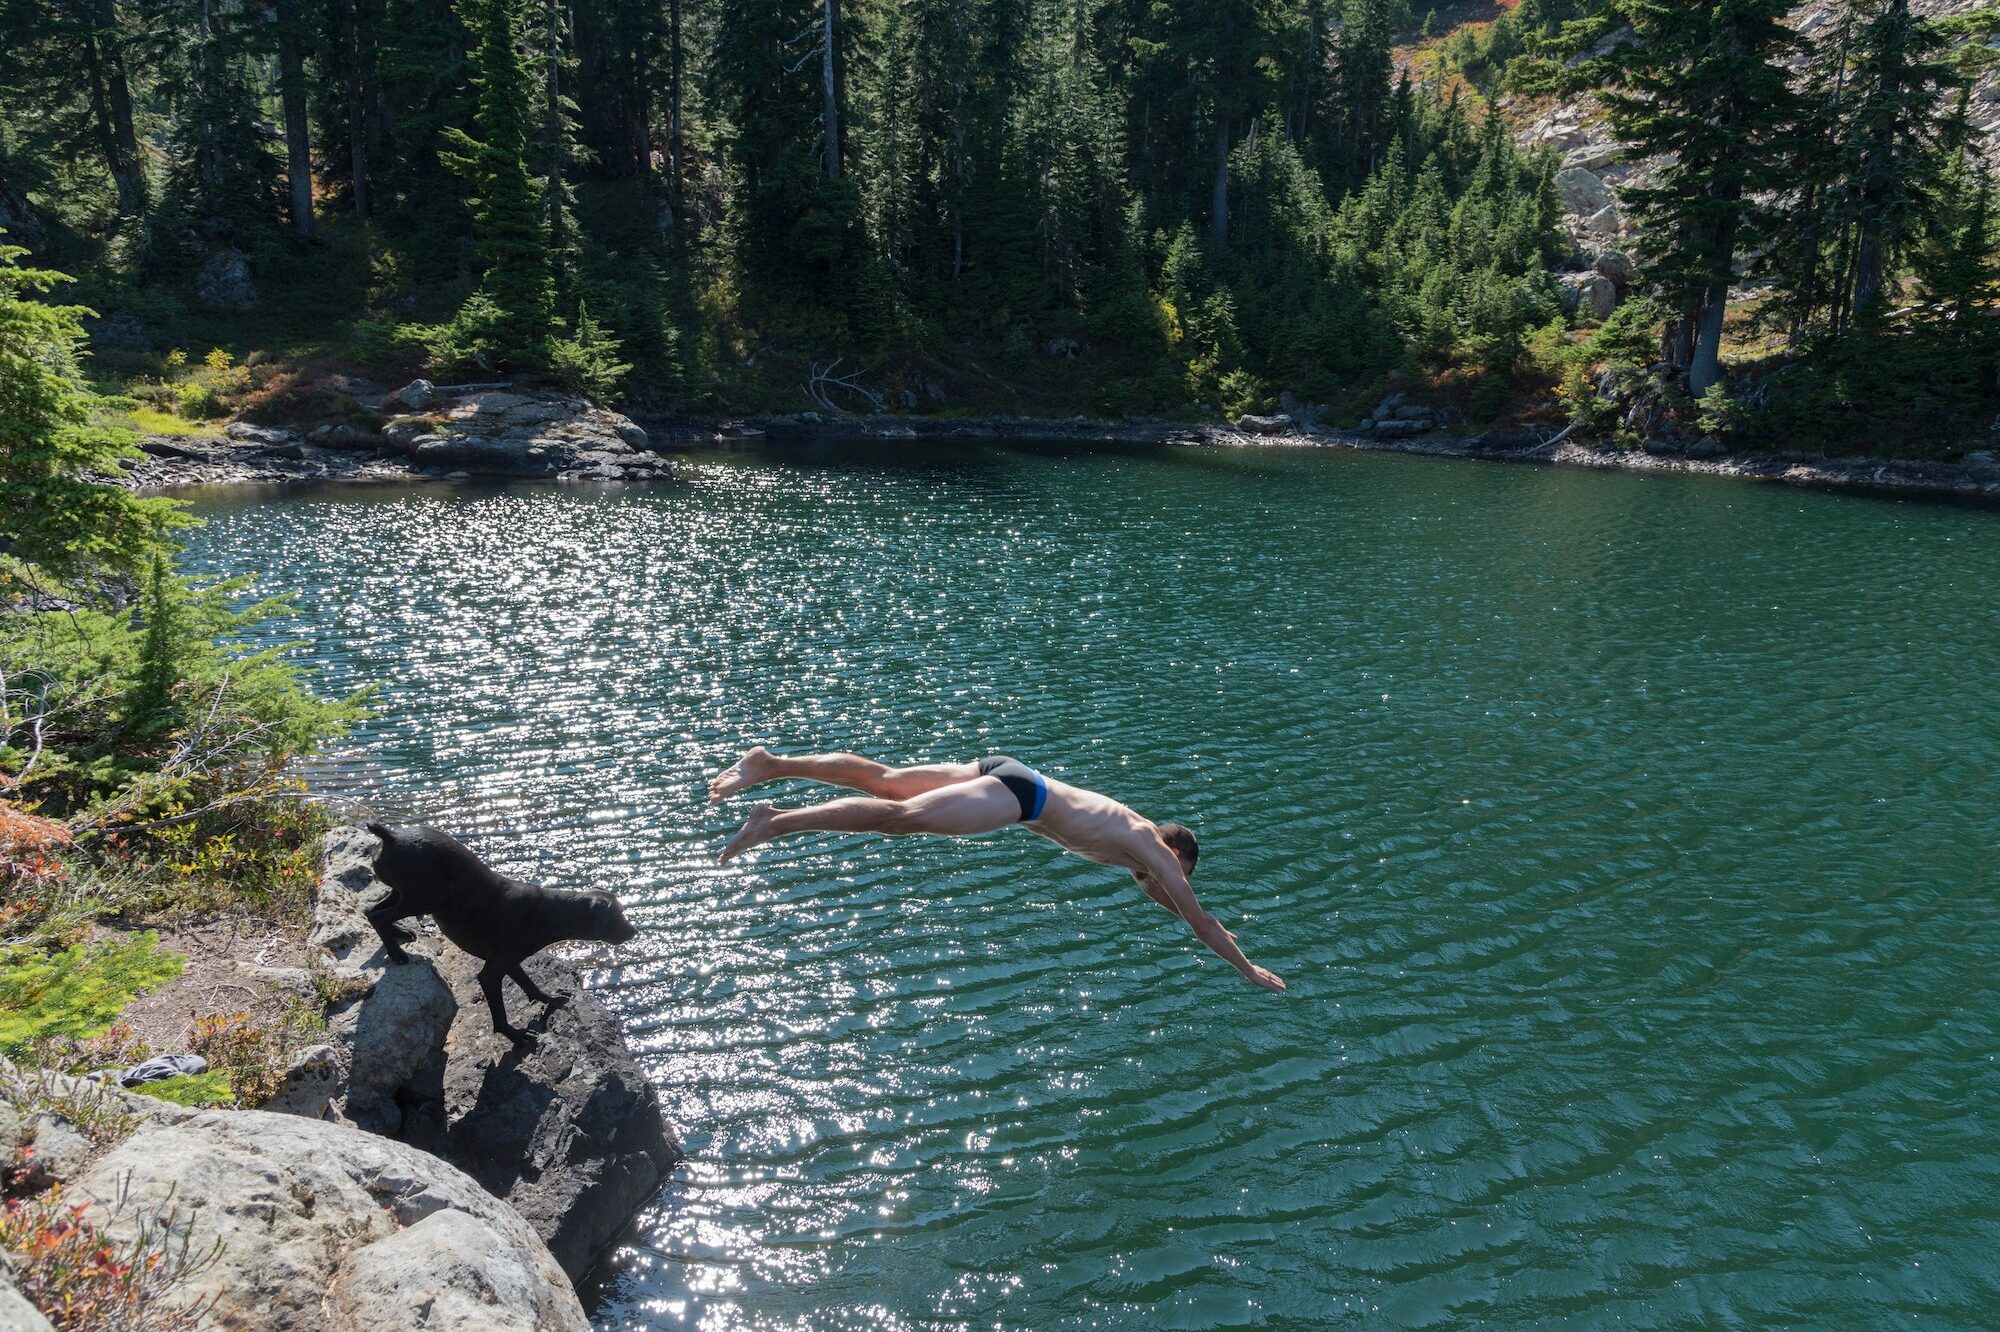 Man diving into alpine lake with his black dog about to jump in after